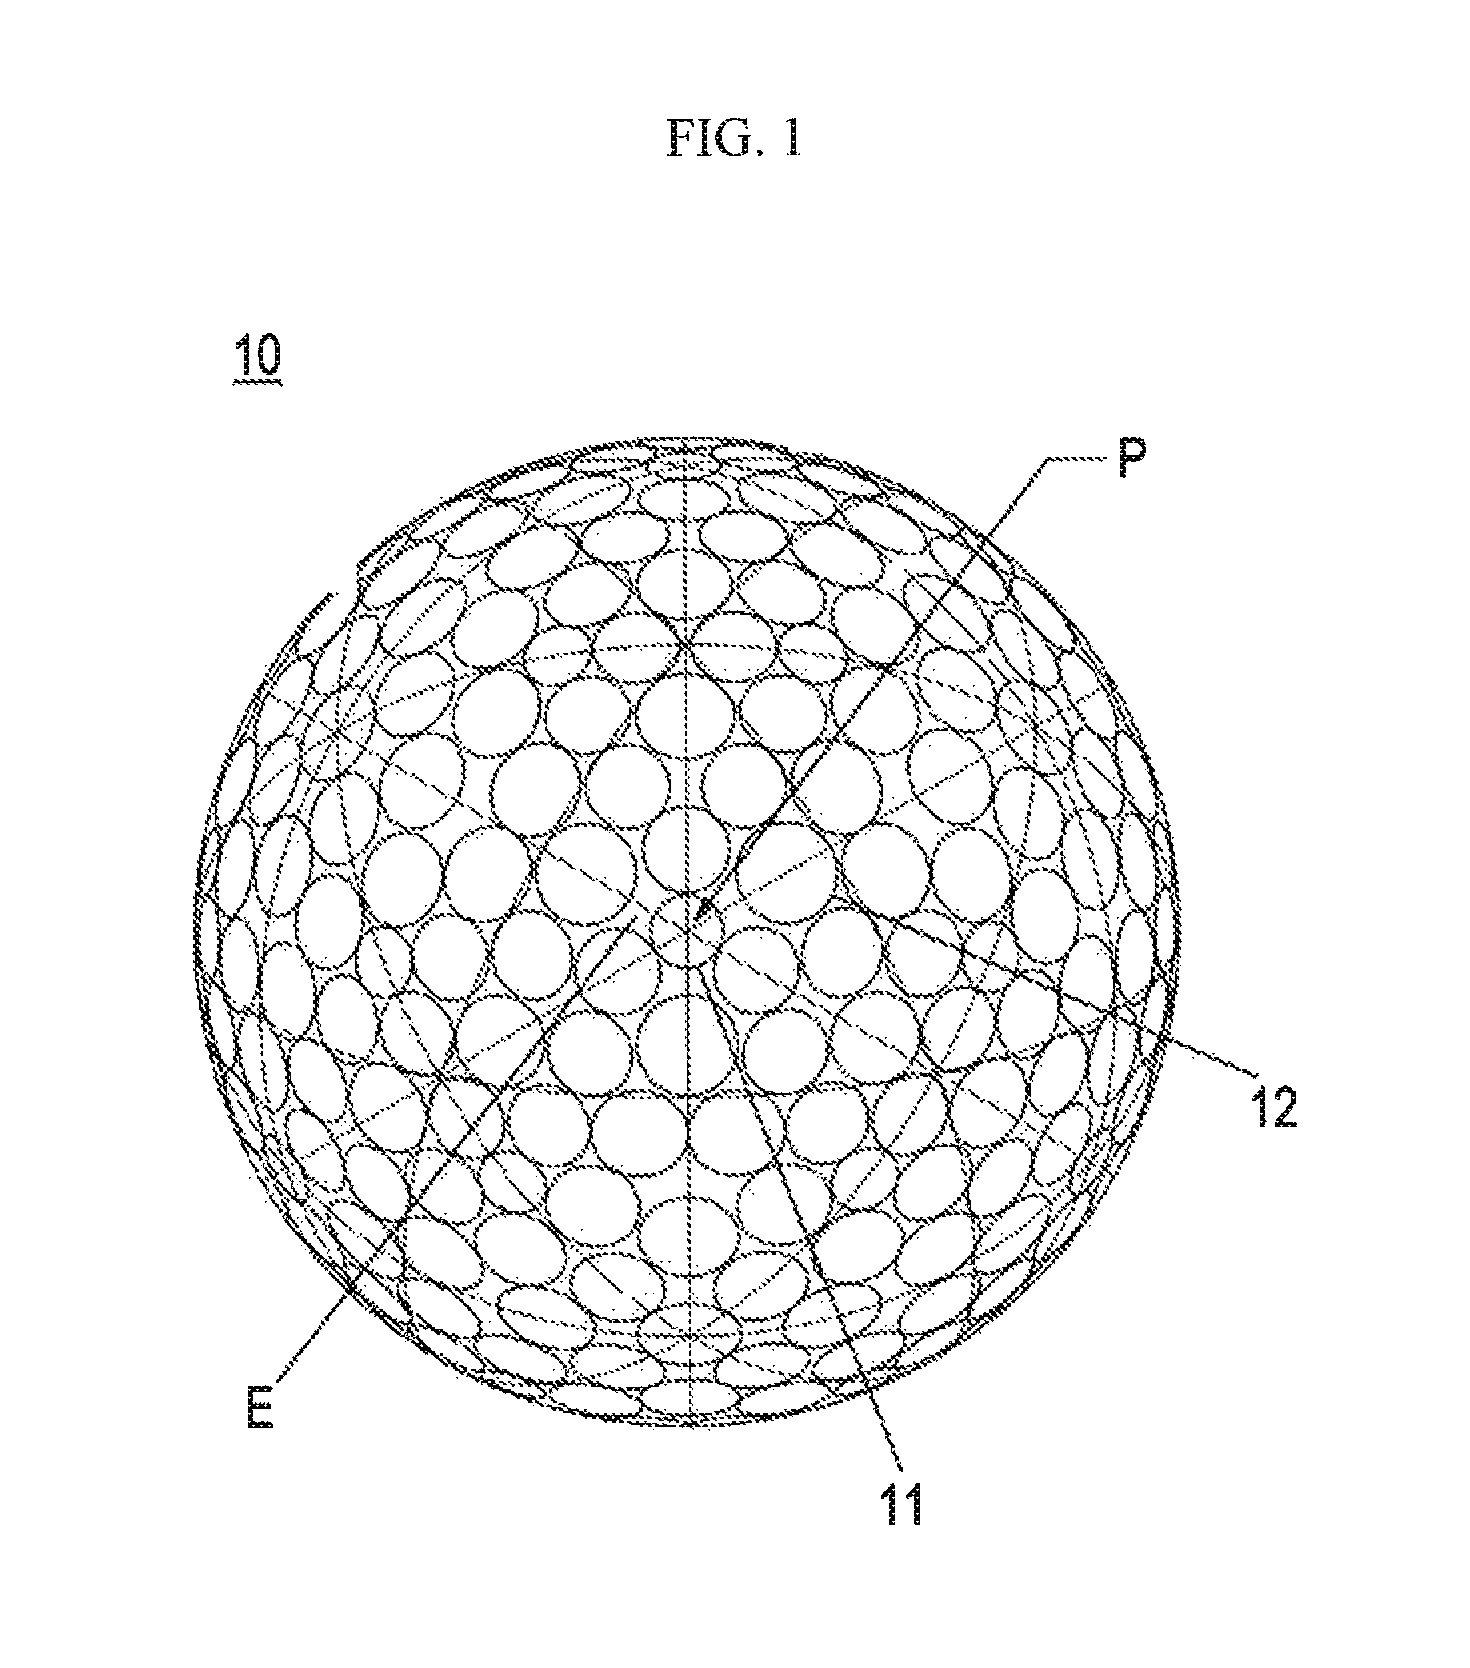 Dimple arrangement on the surface of a golf ball and the golf ball thereof